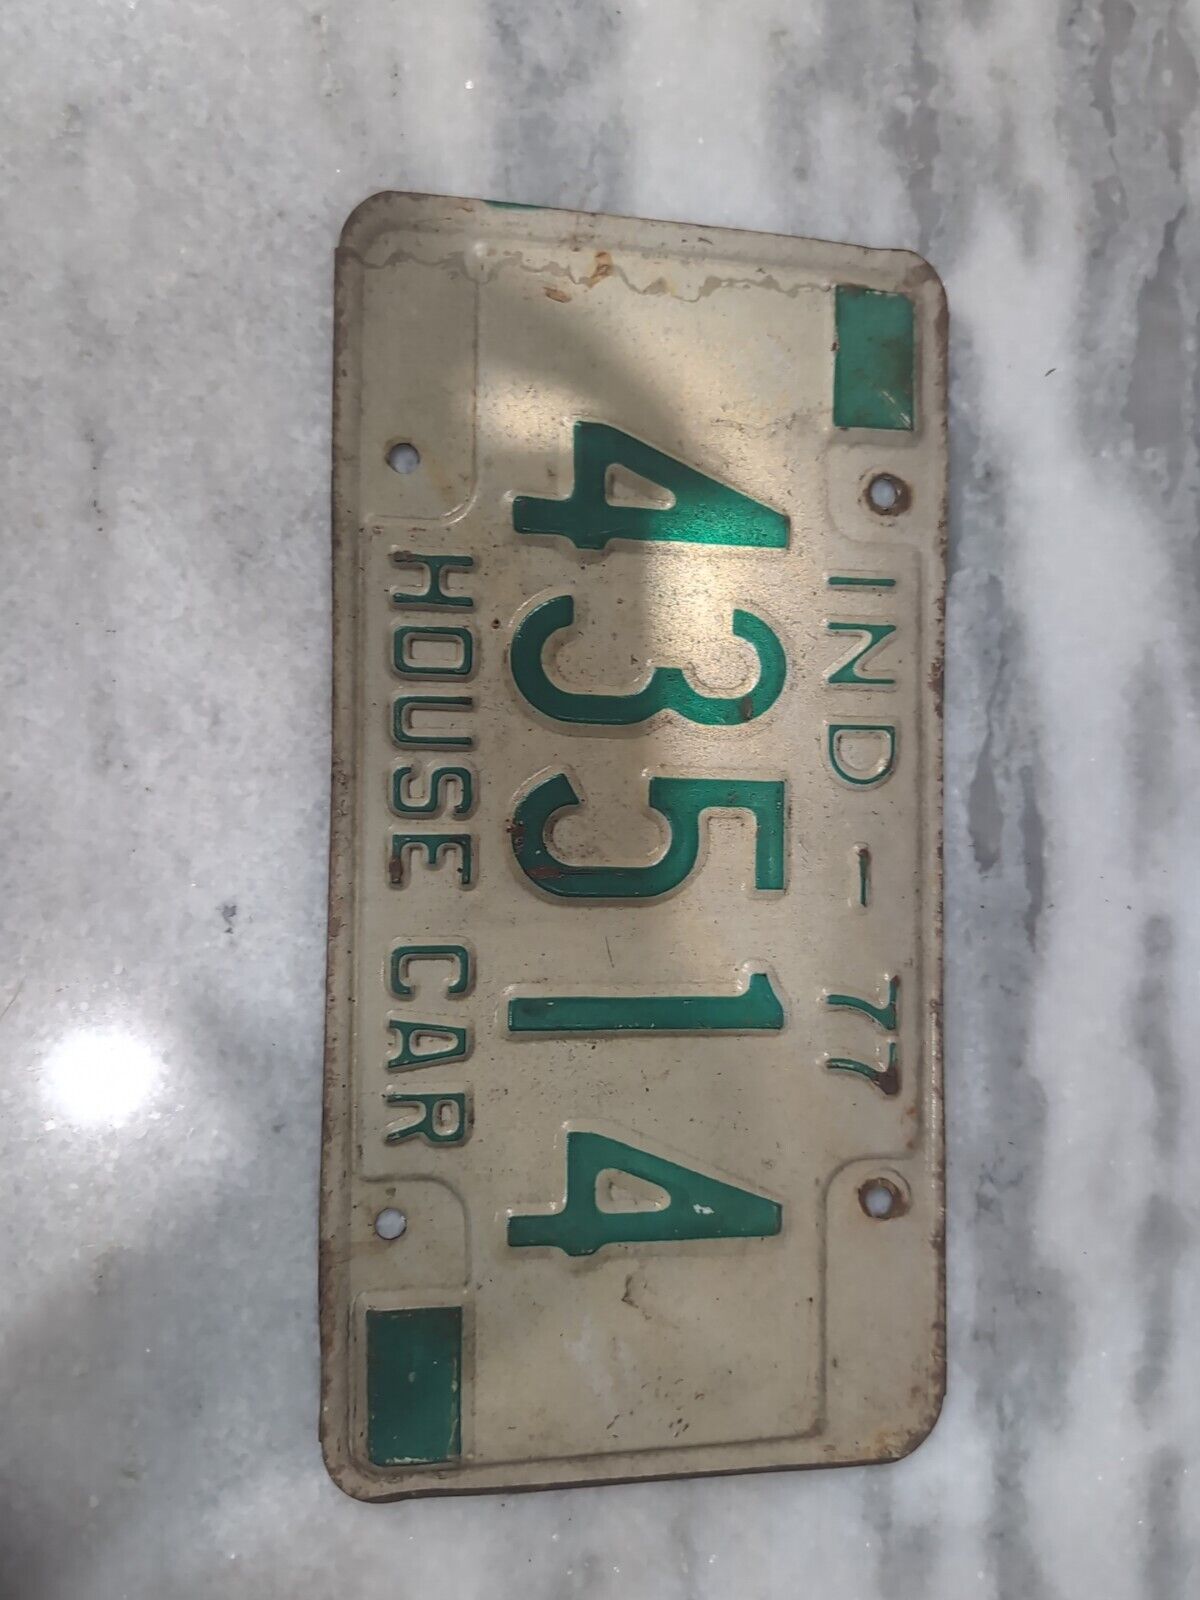 Vintage 1977 Indiana House Car License Plate 43514 Expired Green Text 